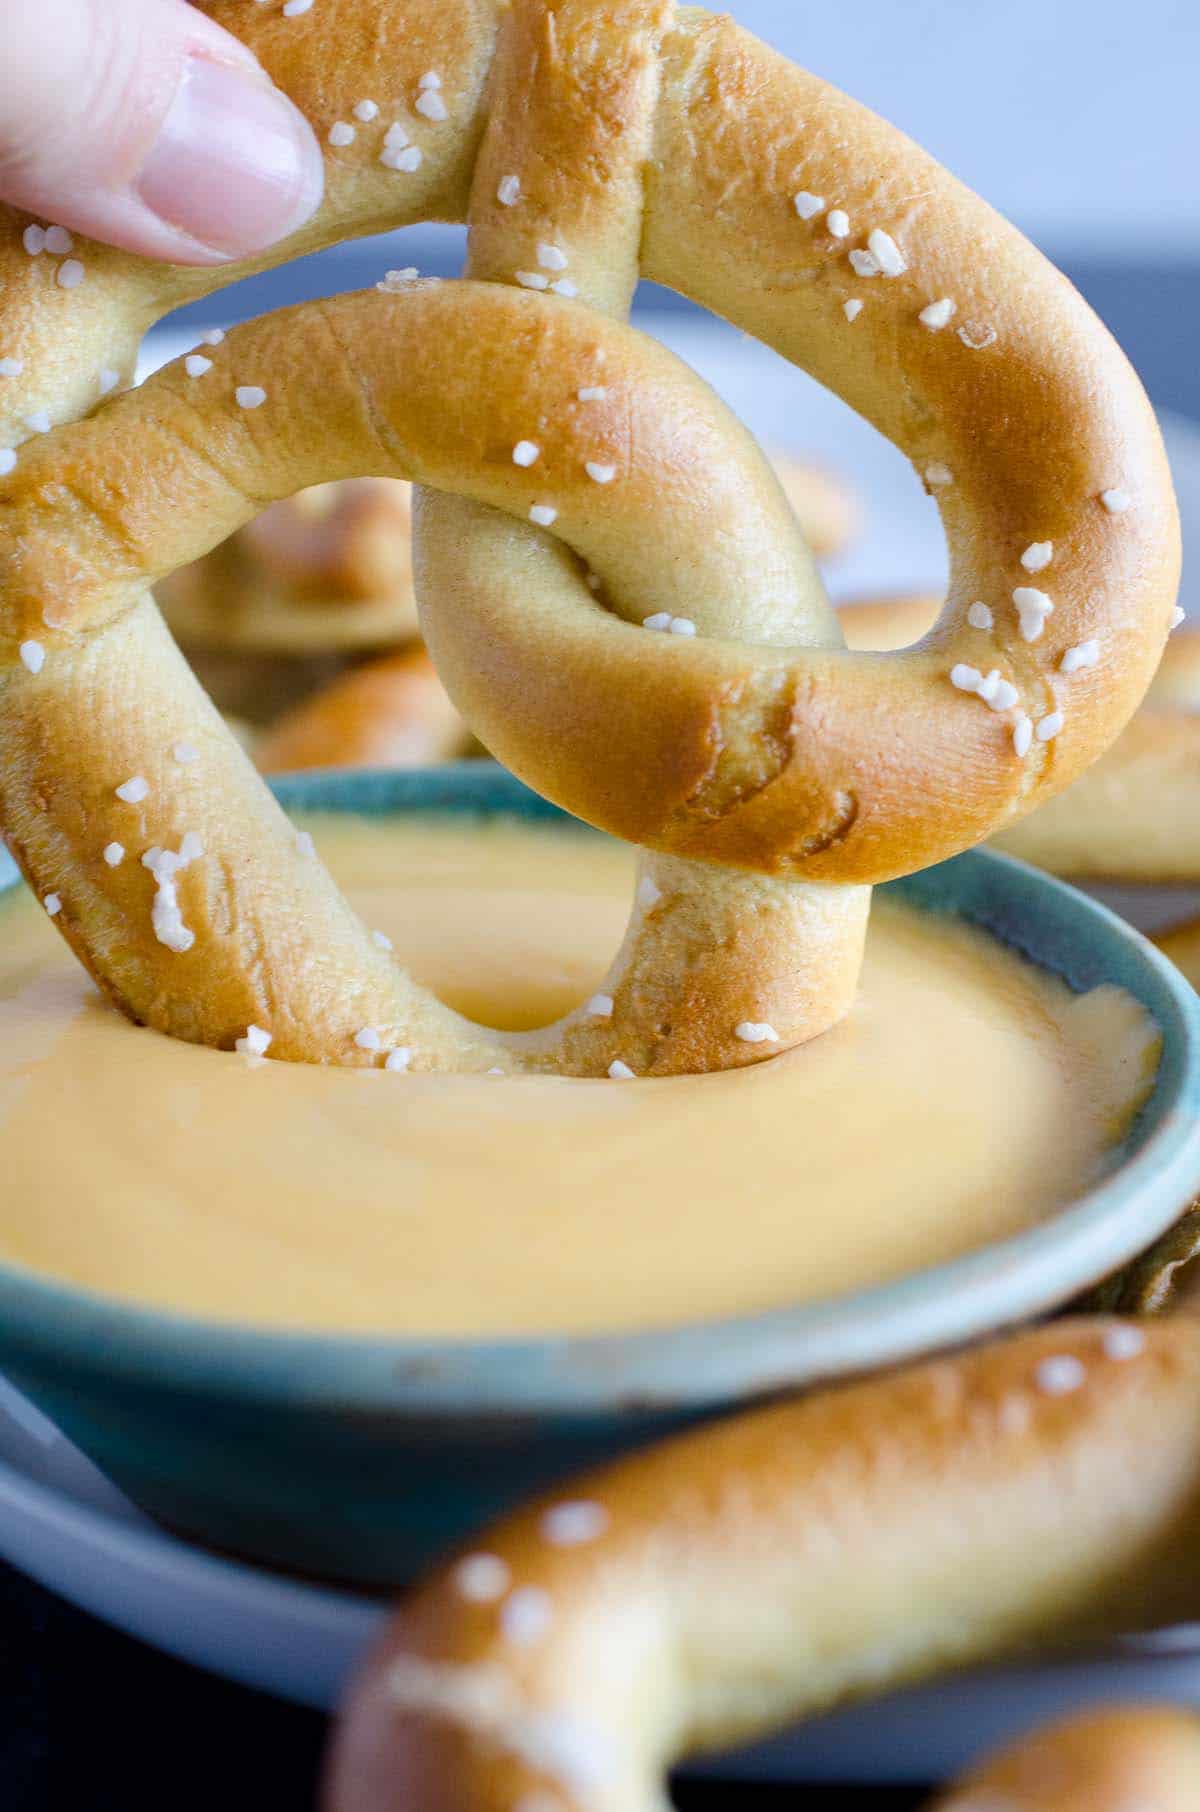 BEST Beer Cheese Dip for soft pretzels, sandwiches and burgers!